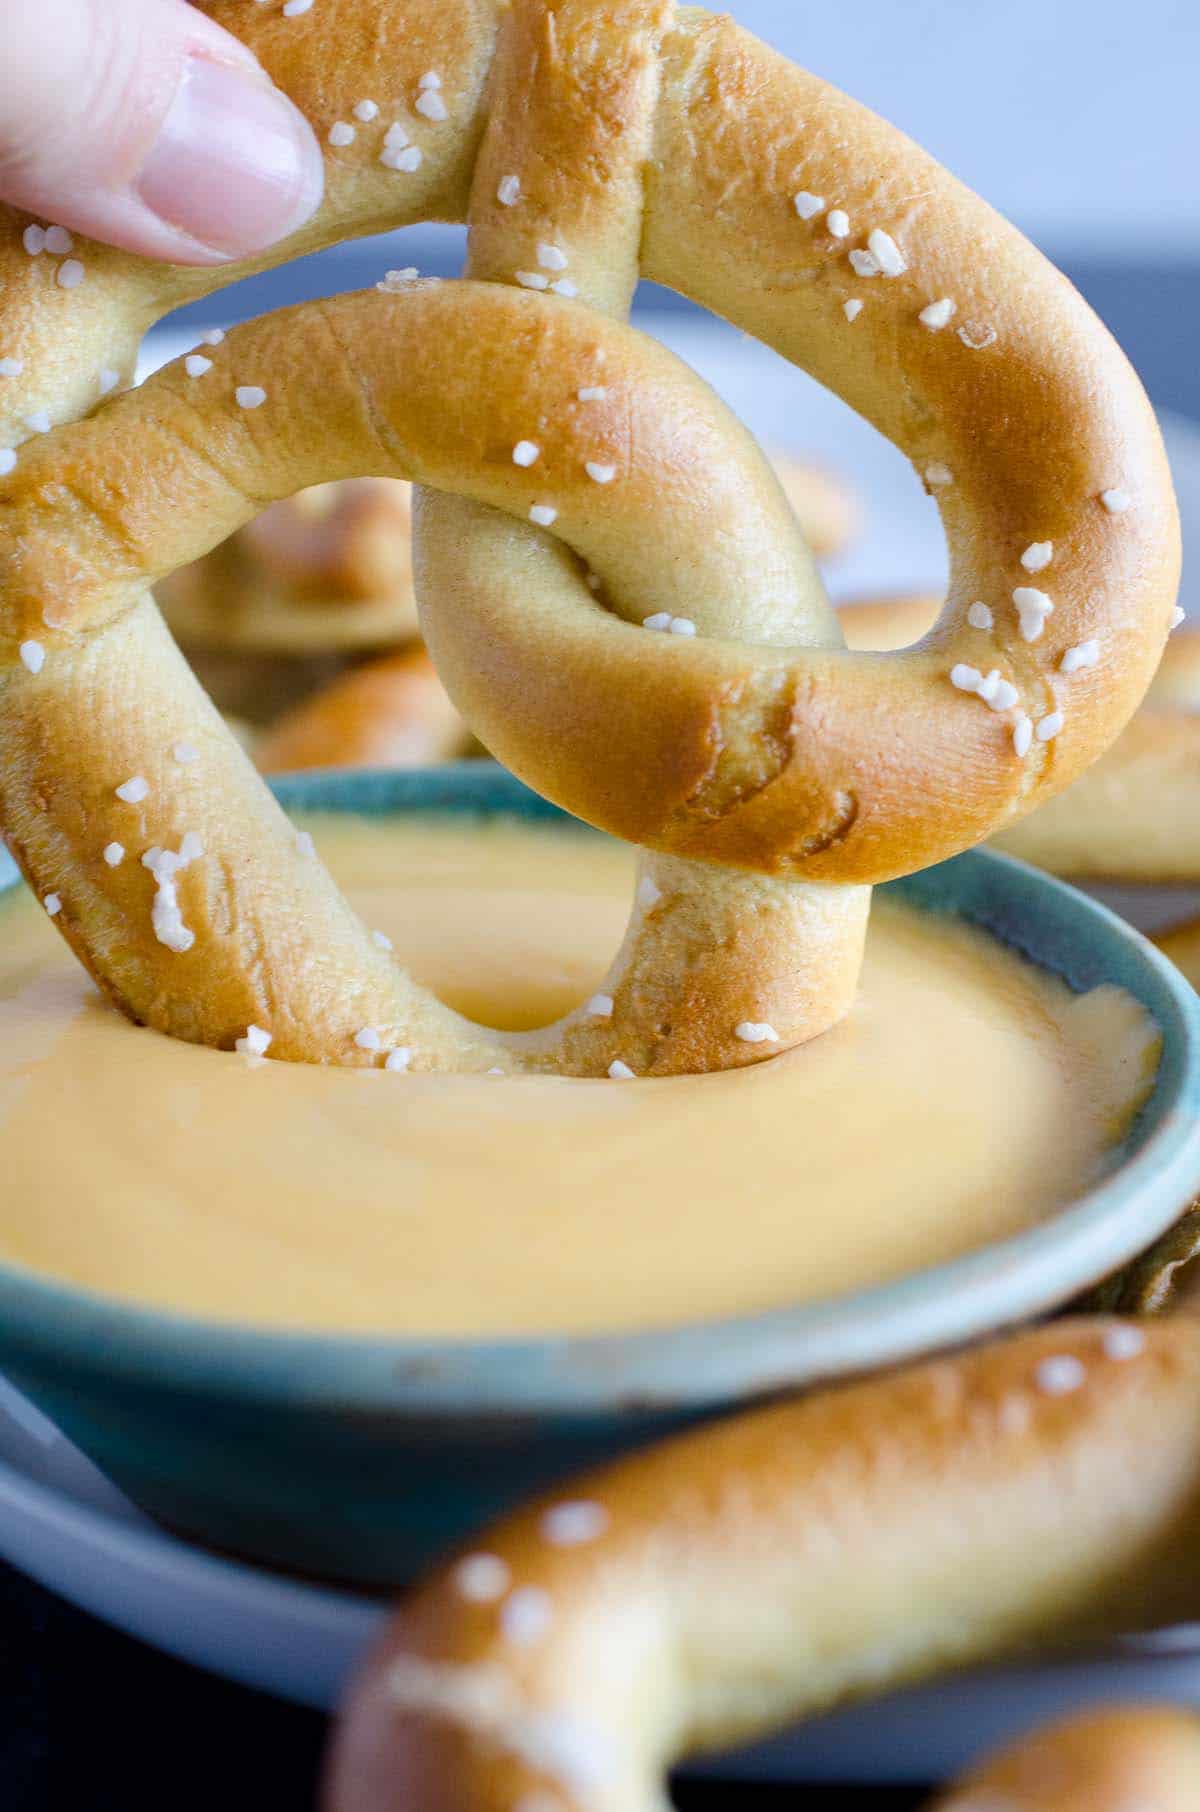 BEST Beer Cheese Dip for soft pretzels, sandwiches and burgers!